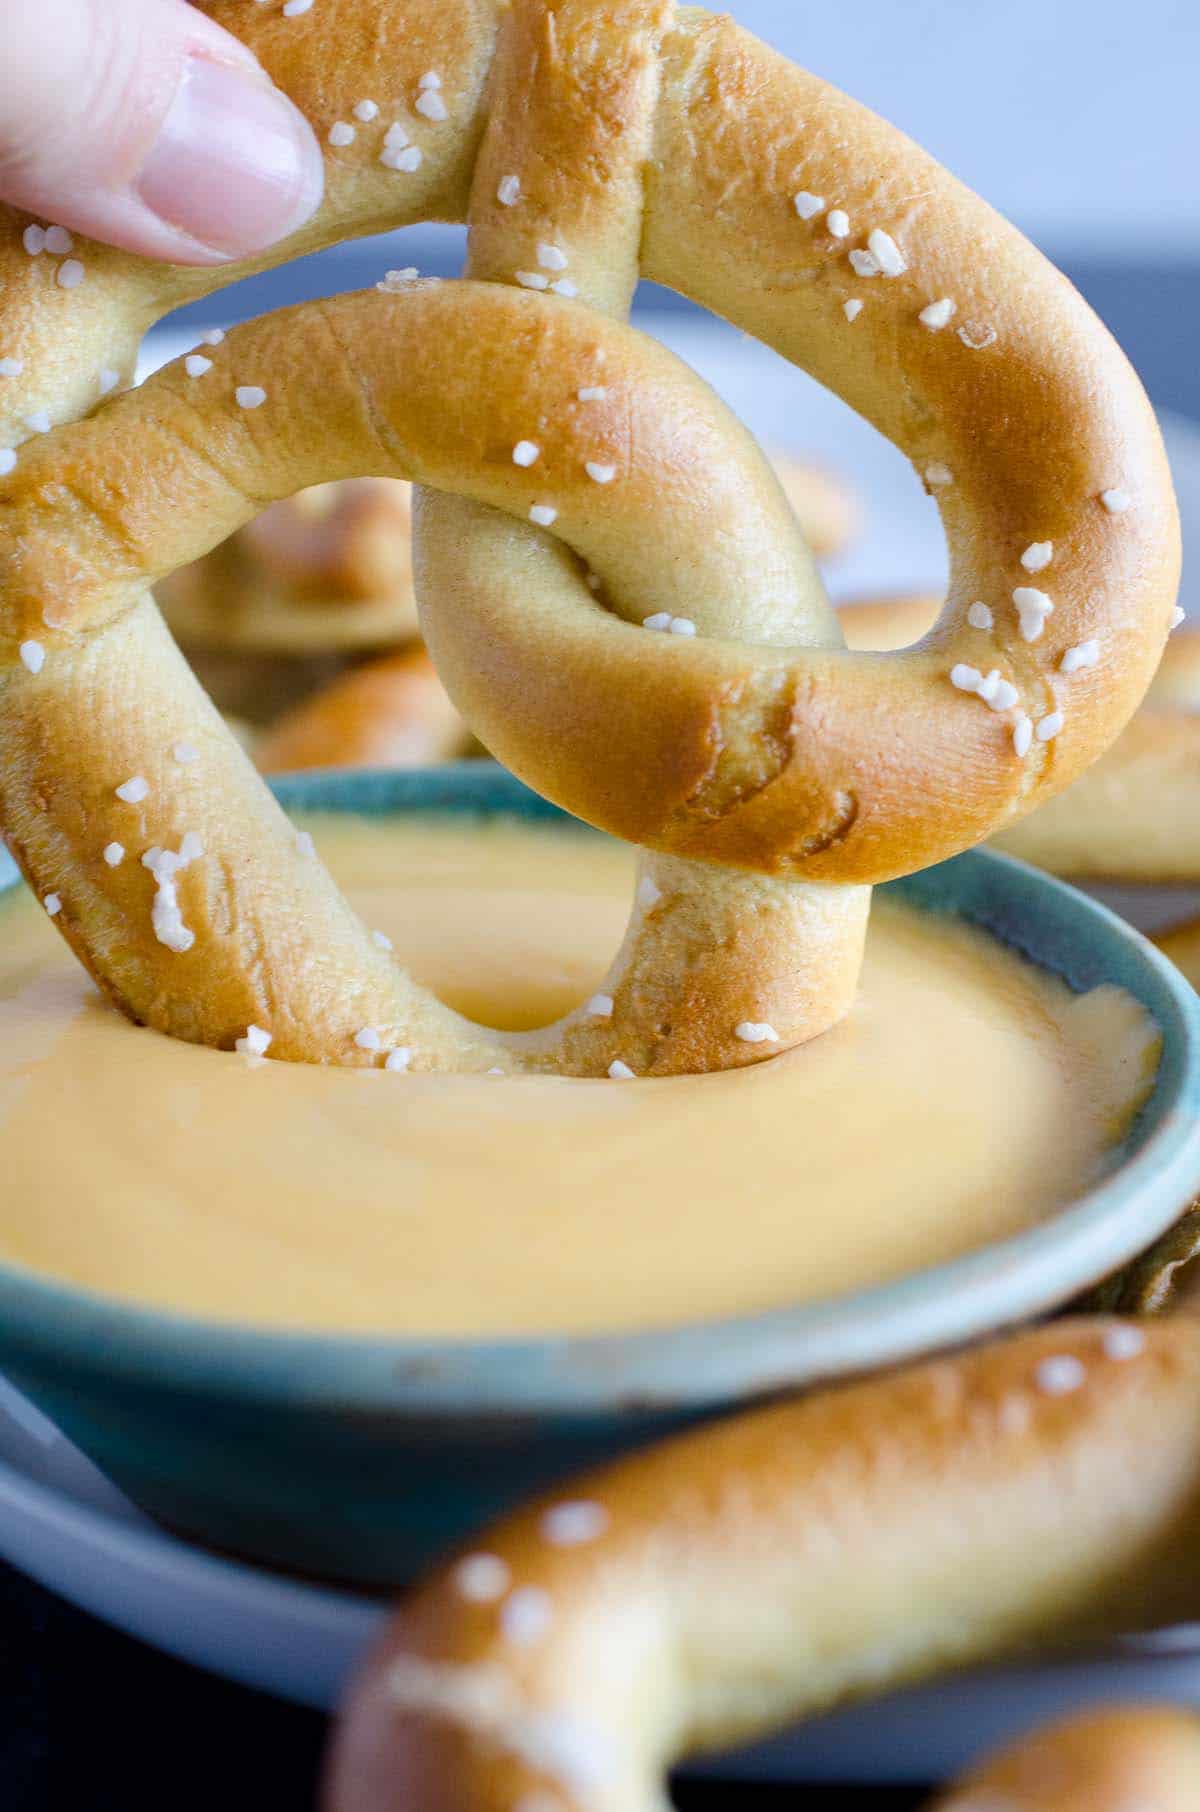 BEST Beer Cheese Dip for soft pretzels, sandwiches and burgers!